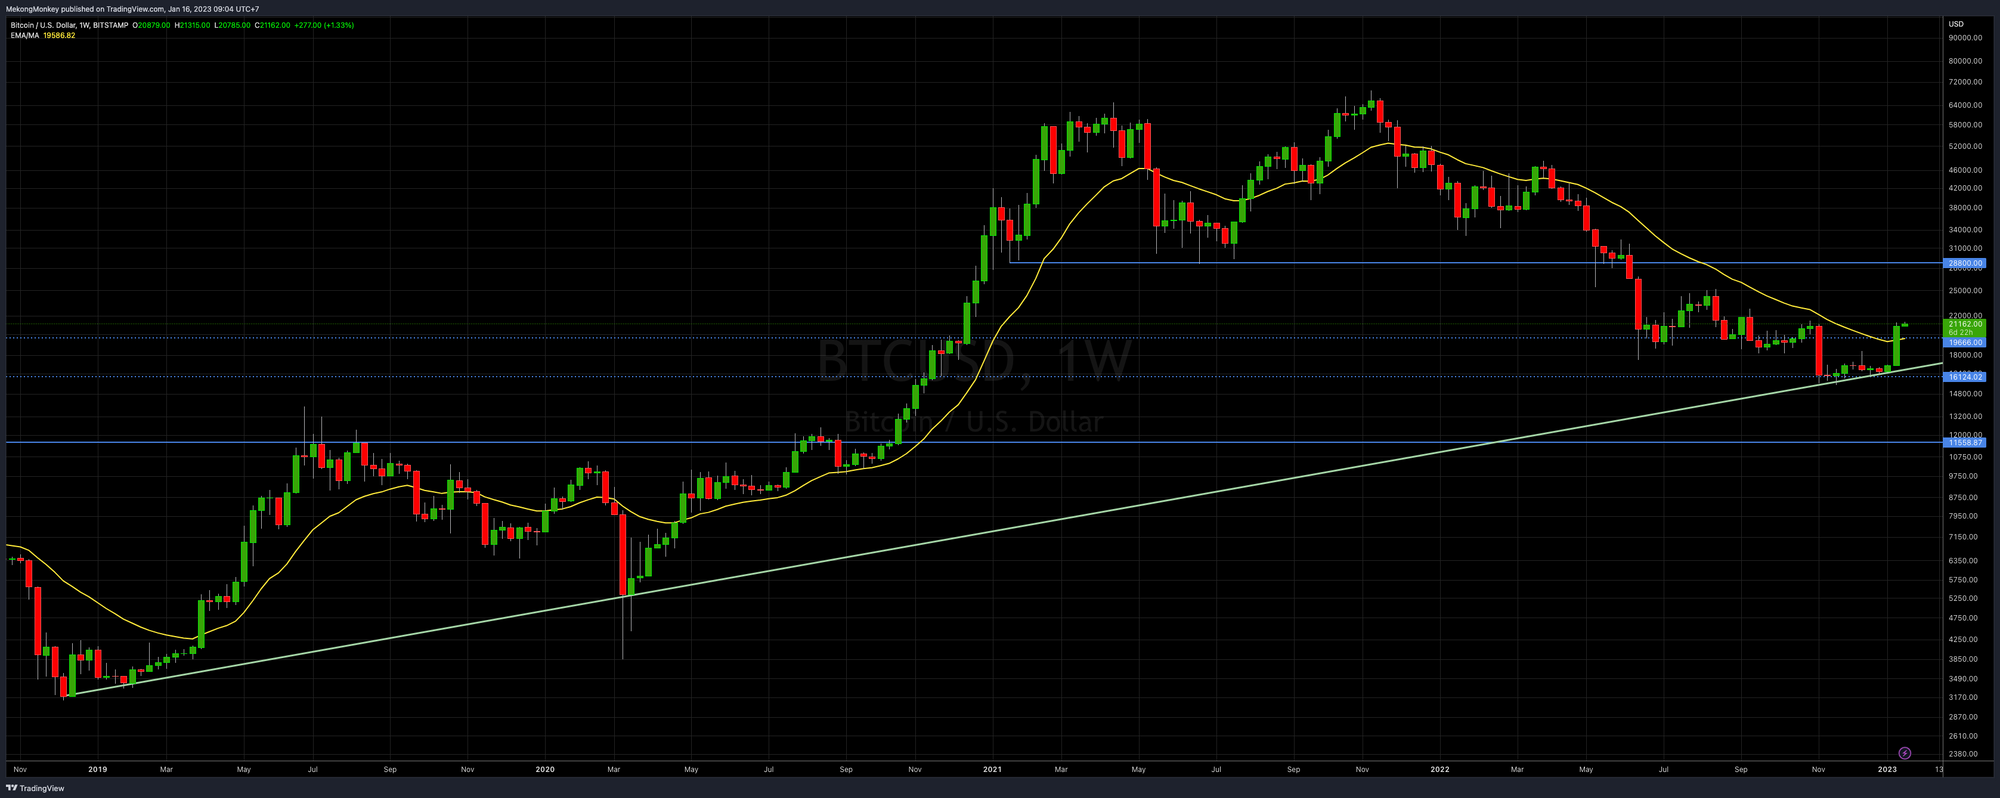 BTCUSD, the weekly chart with the 21 EMA in yellow.